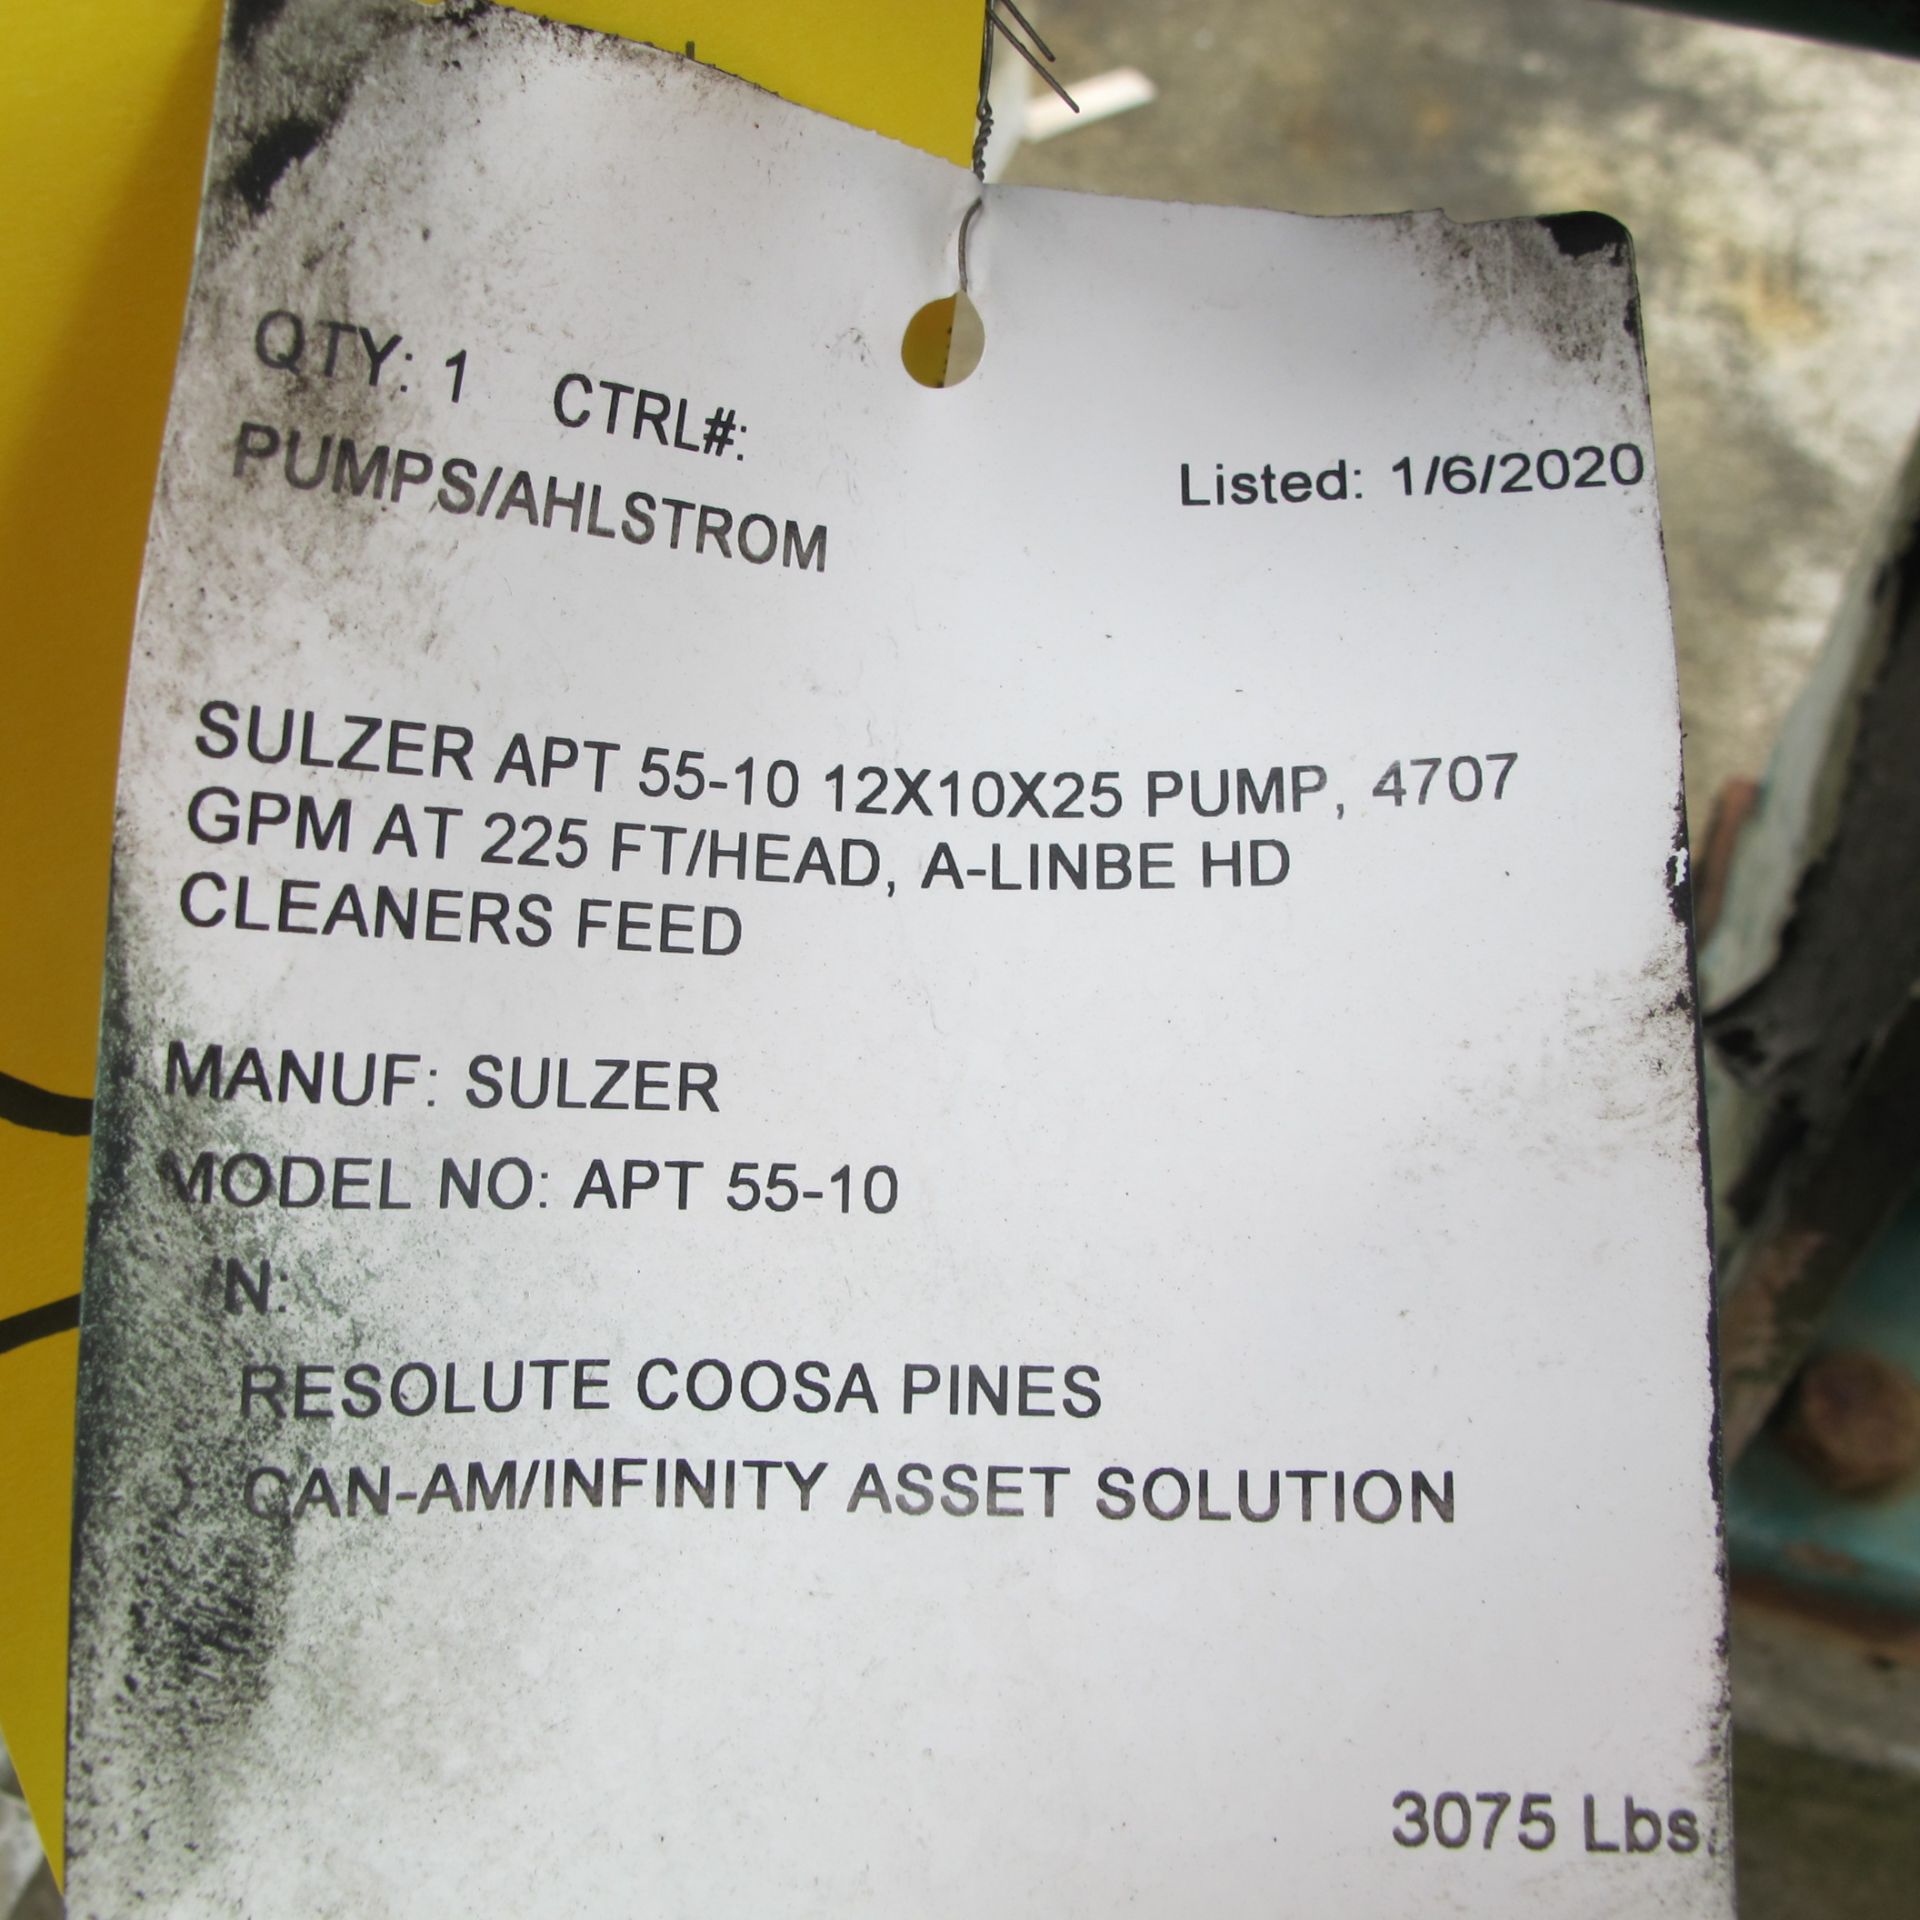 SULZER APT 55-10 12X10X25 PUMP, 4707 GPM AT 225 FT/HEAD, A-LINE HD CLEANERS FEED (42480) - Image 4 of 4